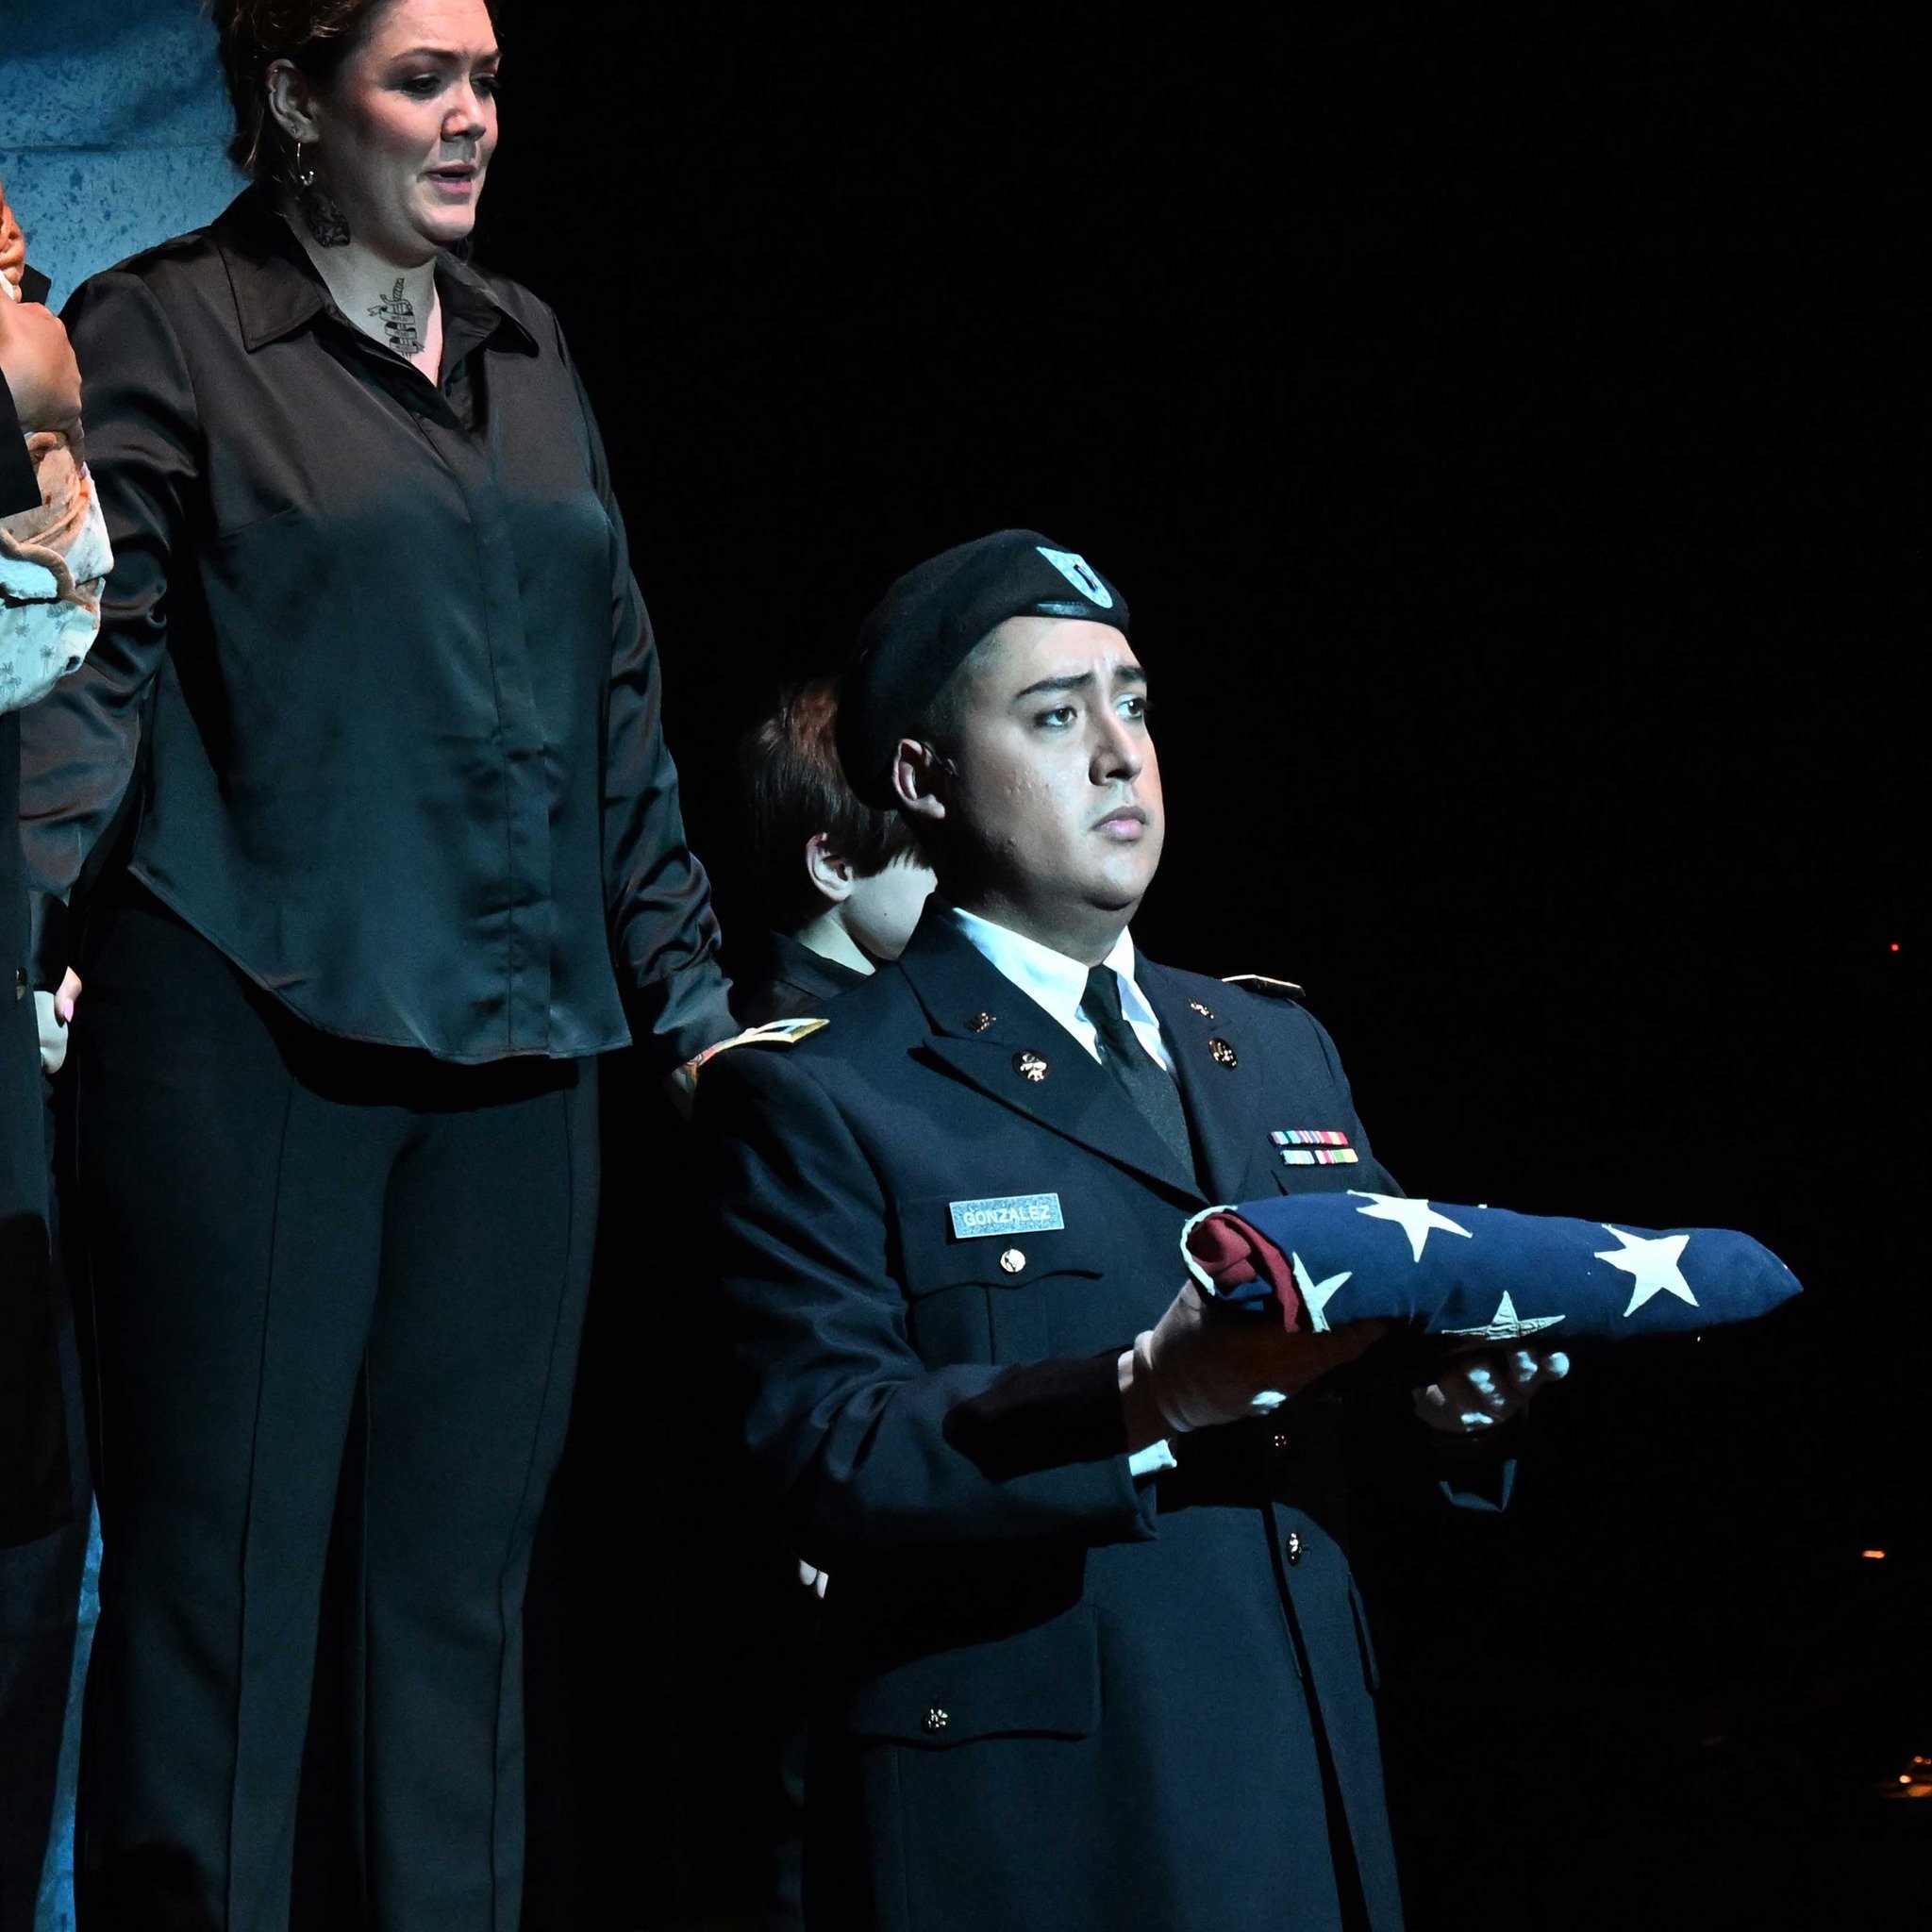 This Memorial Day weekend, we're looking back on our 2023 production of THE KNOCK, an opera co-commissioned by Cincinnati Opera that explores what the loved ones of those serving endure. We are taking today to honor and remember the perseverance and 